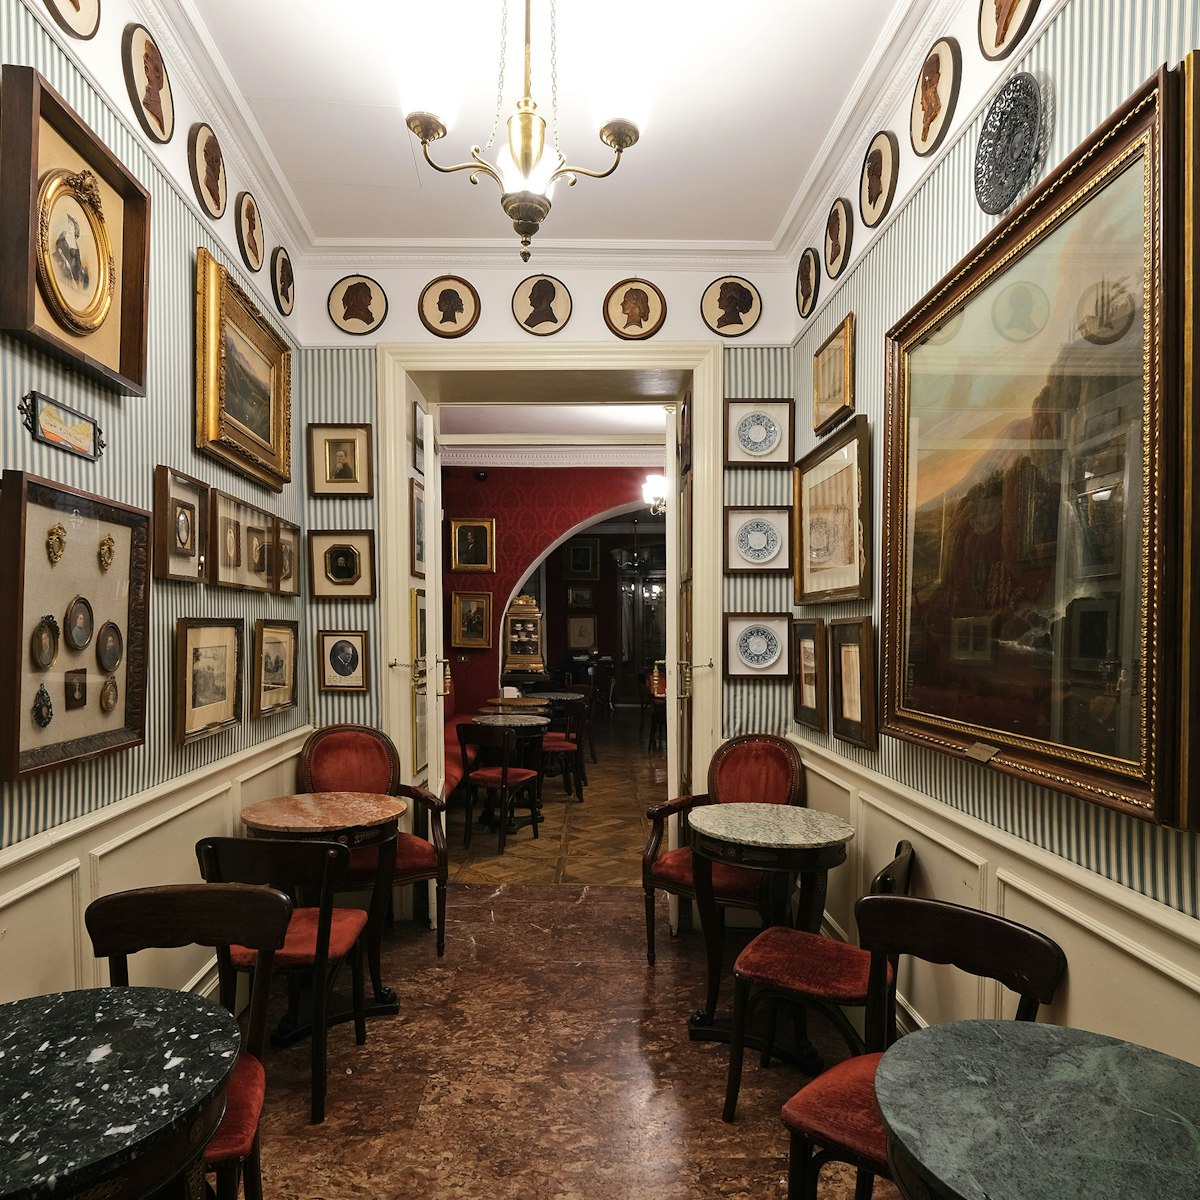 Rome, Antico Caffè Greco: Keats & Byron drank coffee at the marble tables of this celebrated, richly-ornate 18th-century cafe.